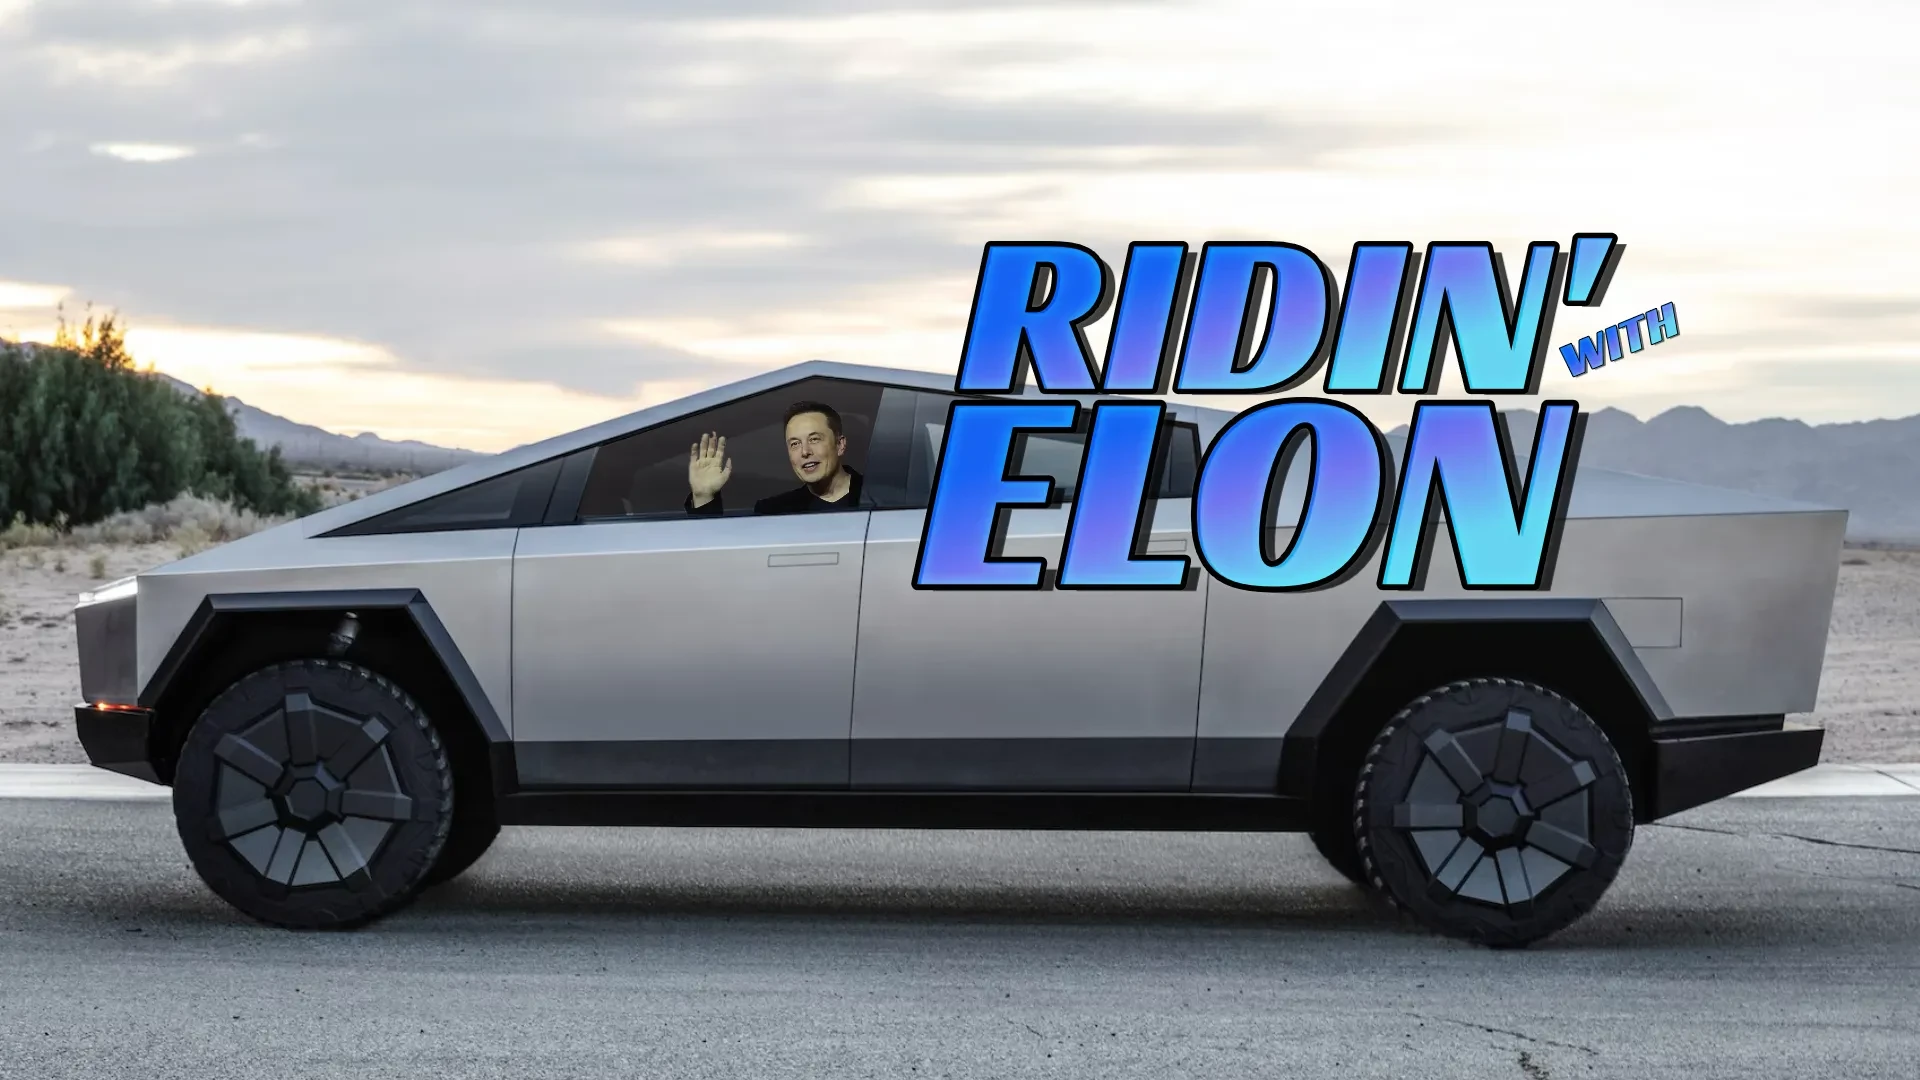 Take the ride of your life with Elon in his Cyber Truck - Featured image